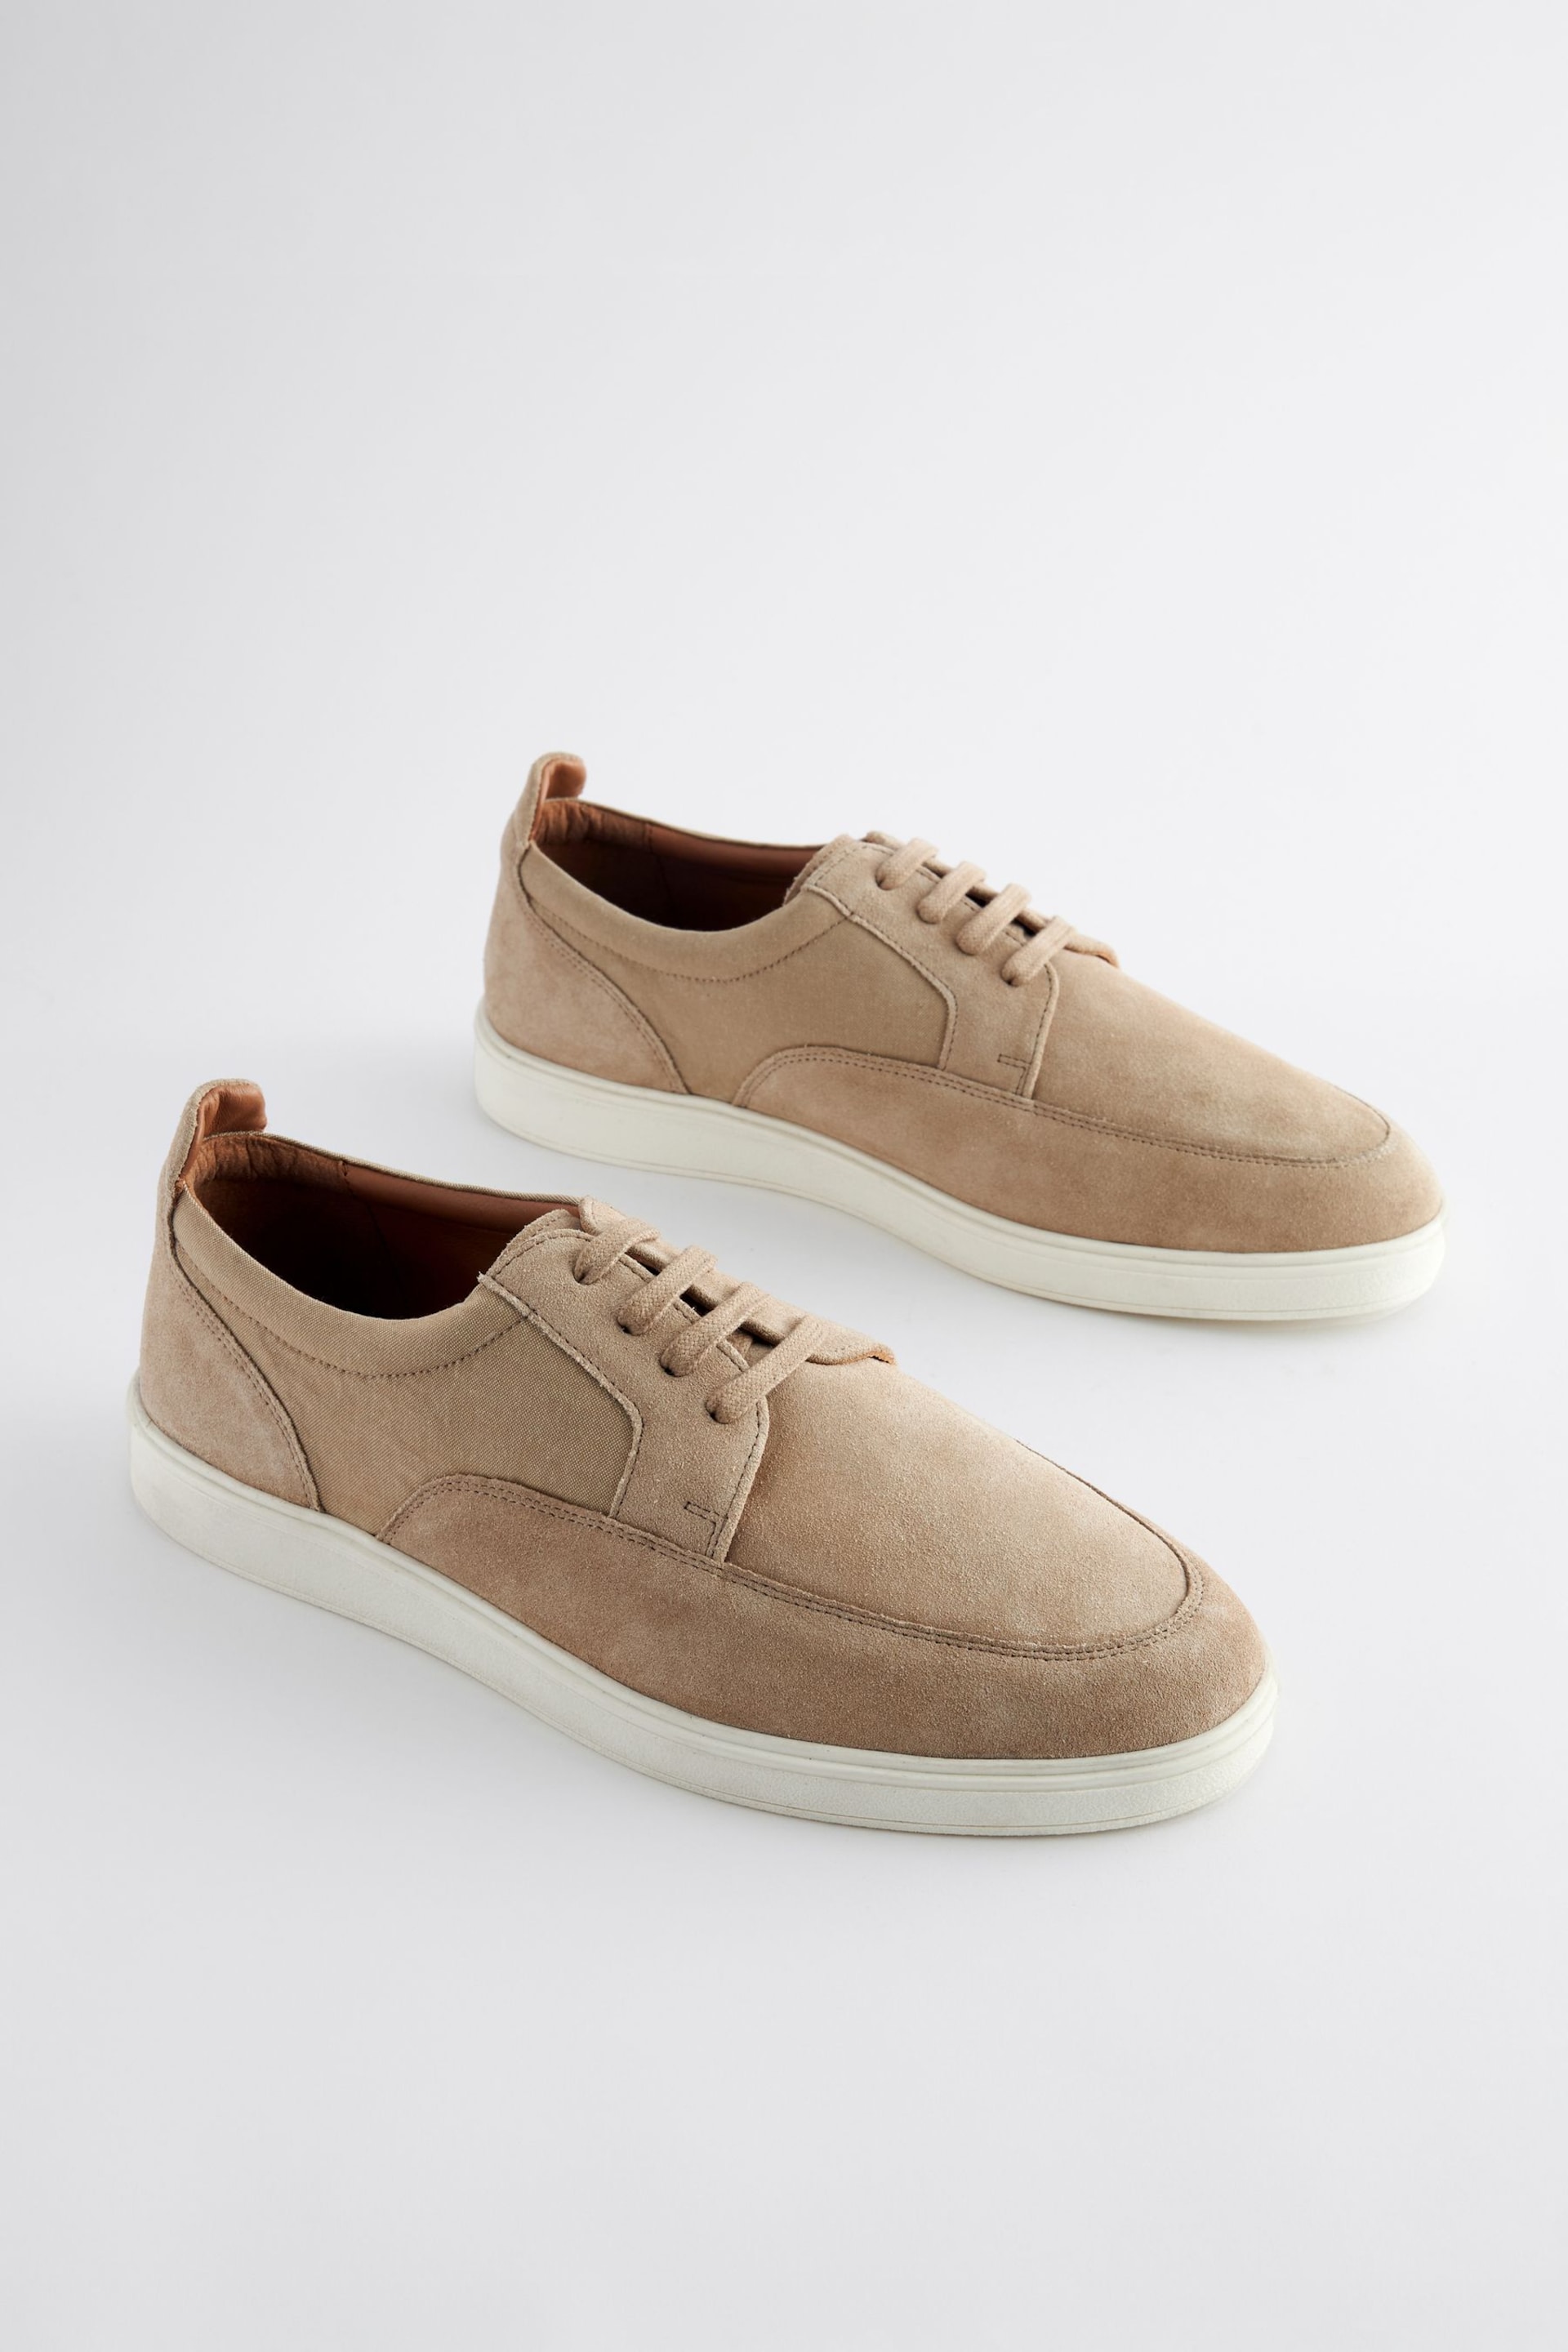 Stone Cream Suede Cupsole Casual Shoes - Image 2 of 7